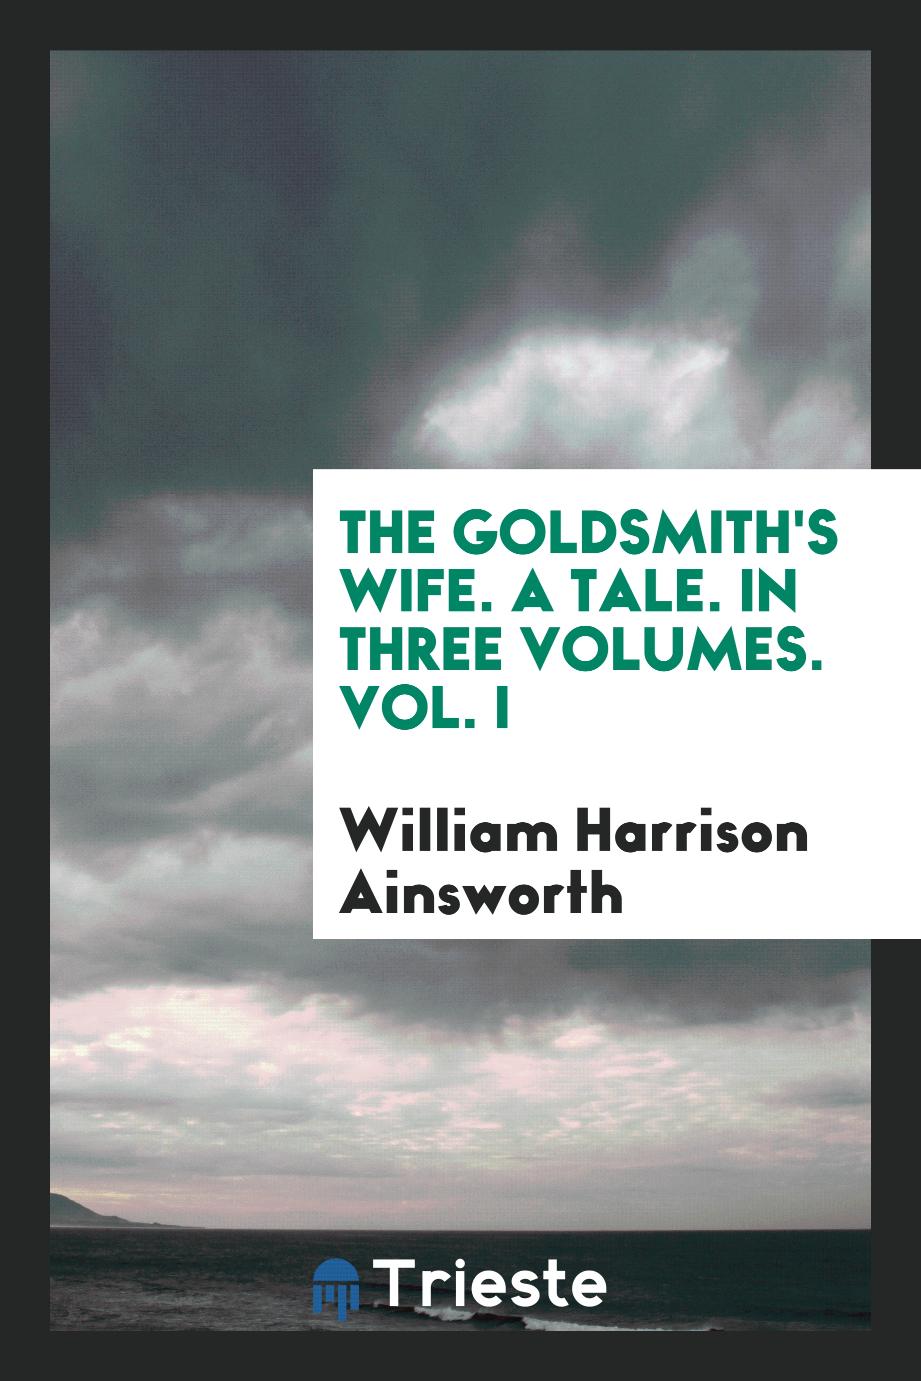 The Goldsmith's Wife. A Tale. In Three Volumes. Vol. I